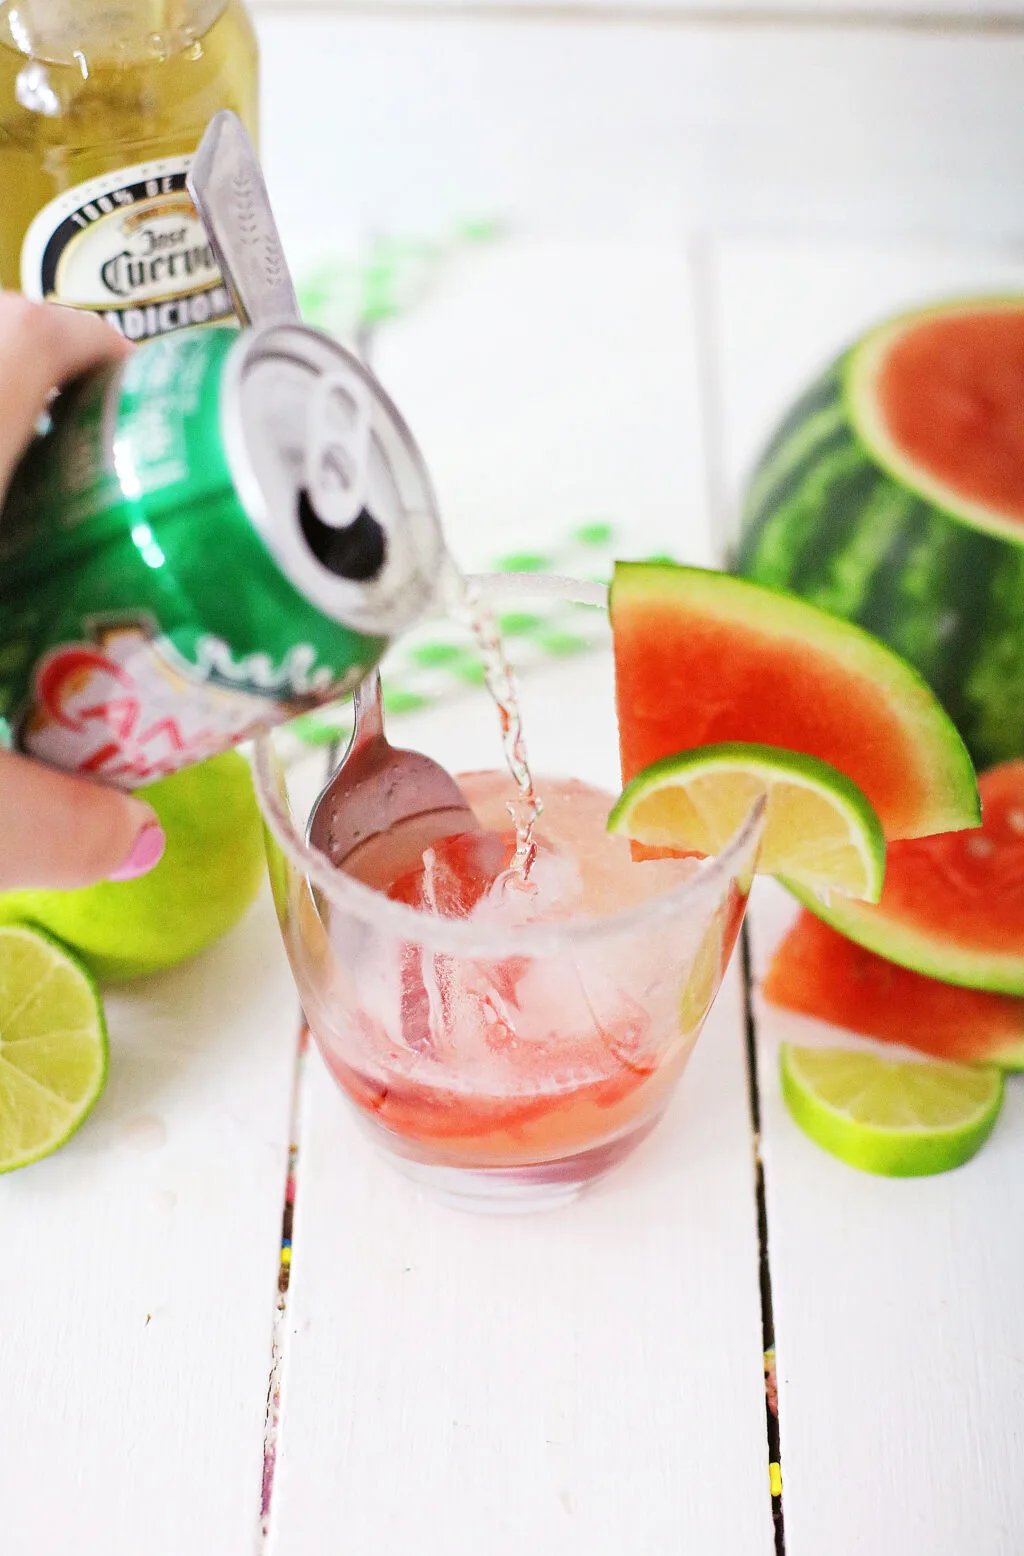 ginger ale being poured into watermelon margarita glass